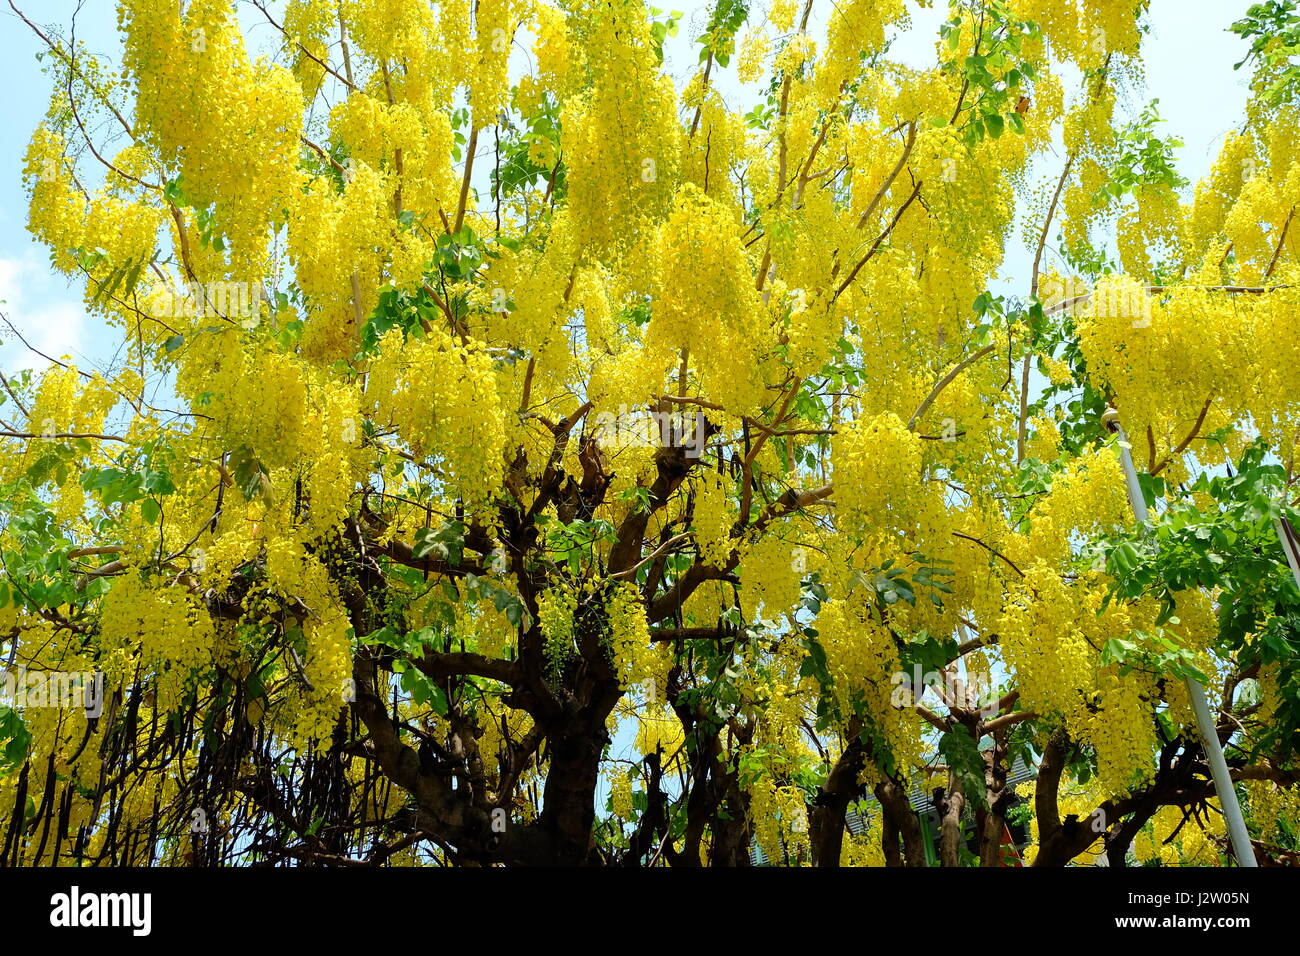 Golden Shower Flower Tree, Blooming in Summer Time in Thailand. Stock Photo